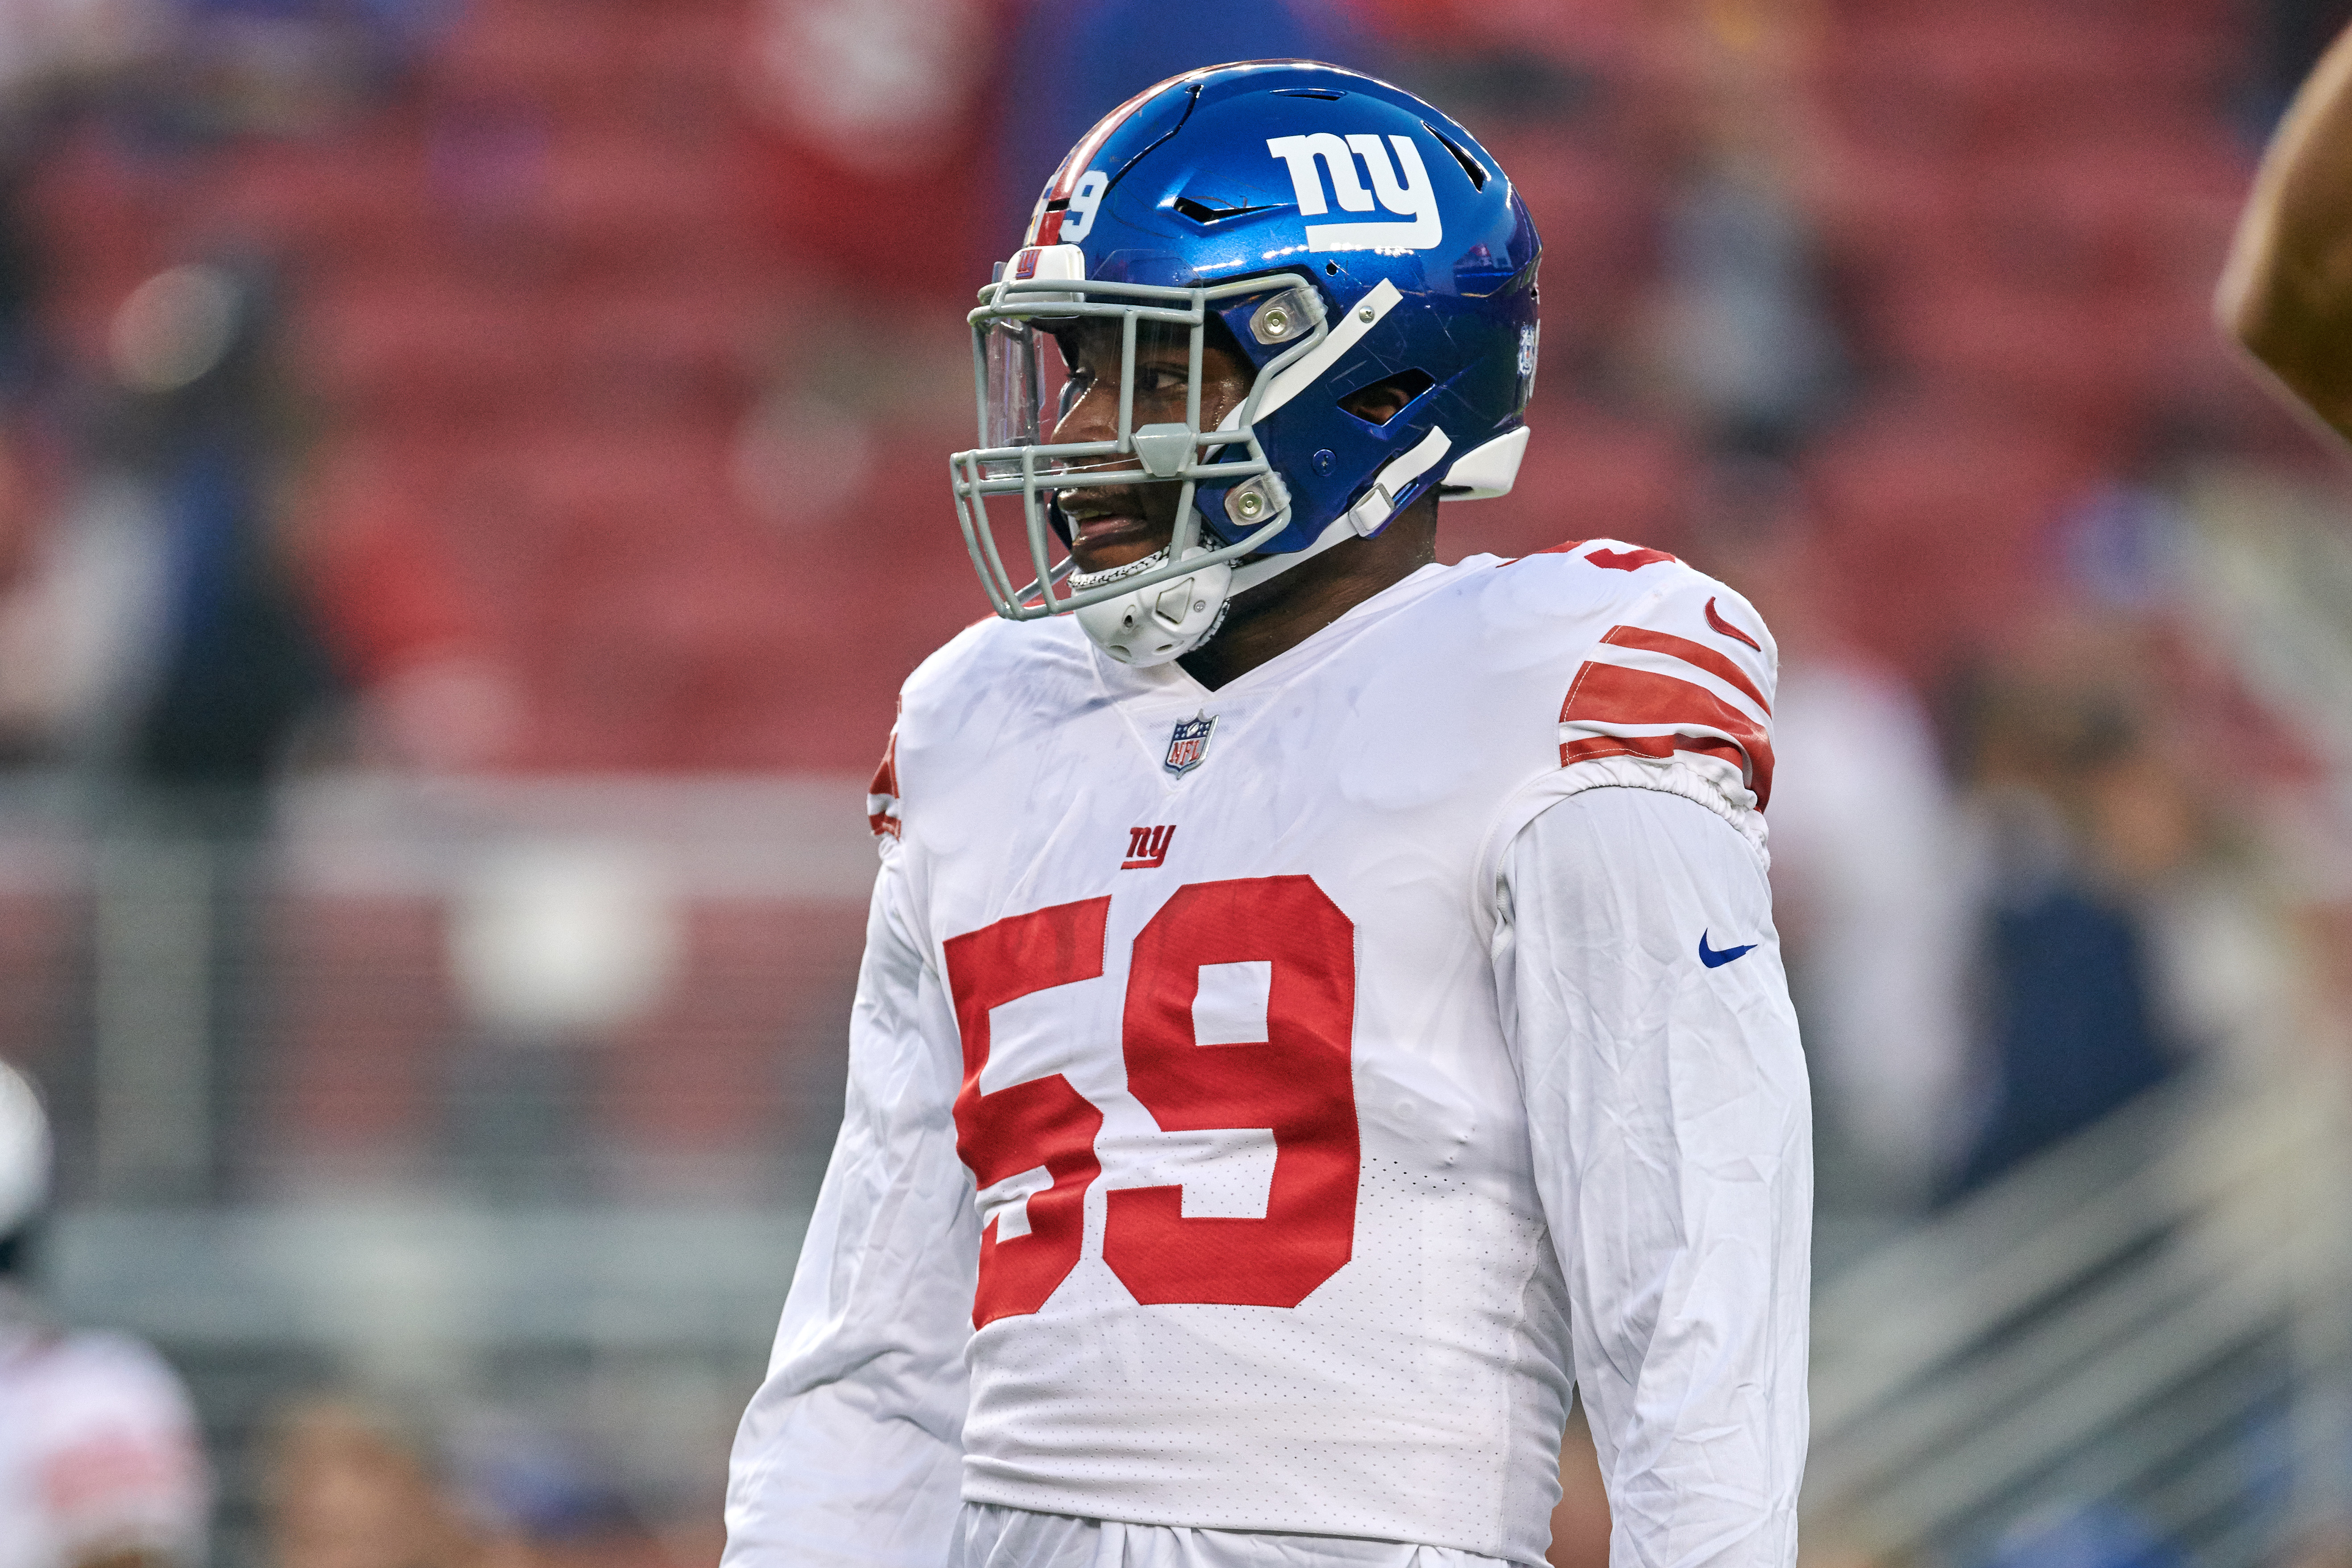 New York Giants linebacker Lorenzo Carter stands on the field during NFL game